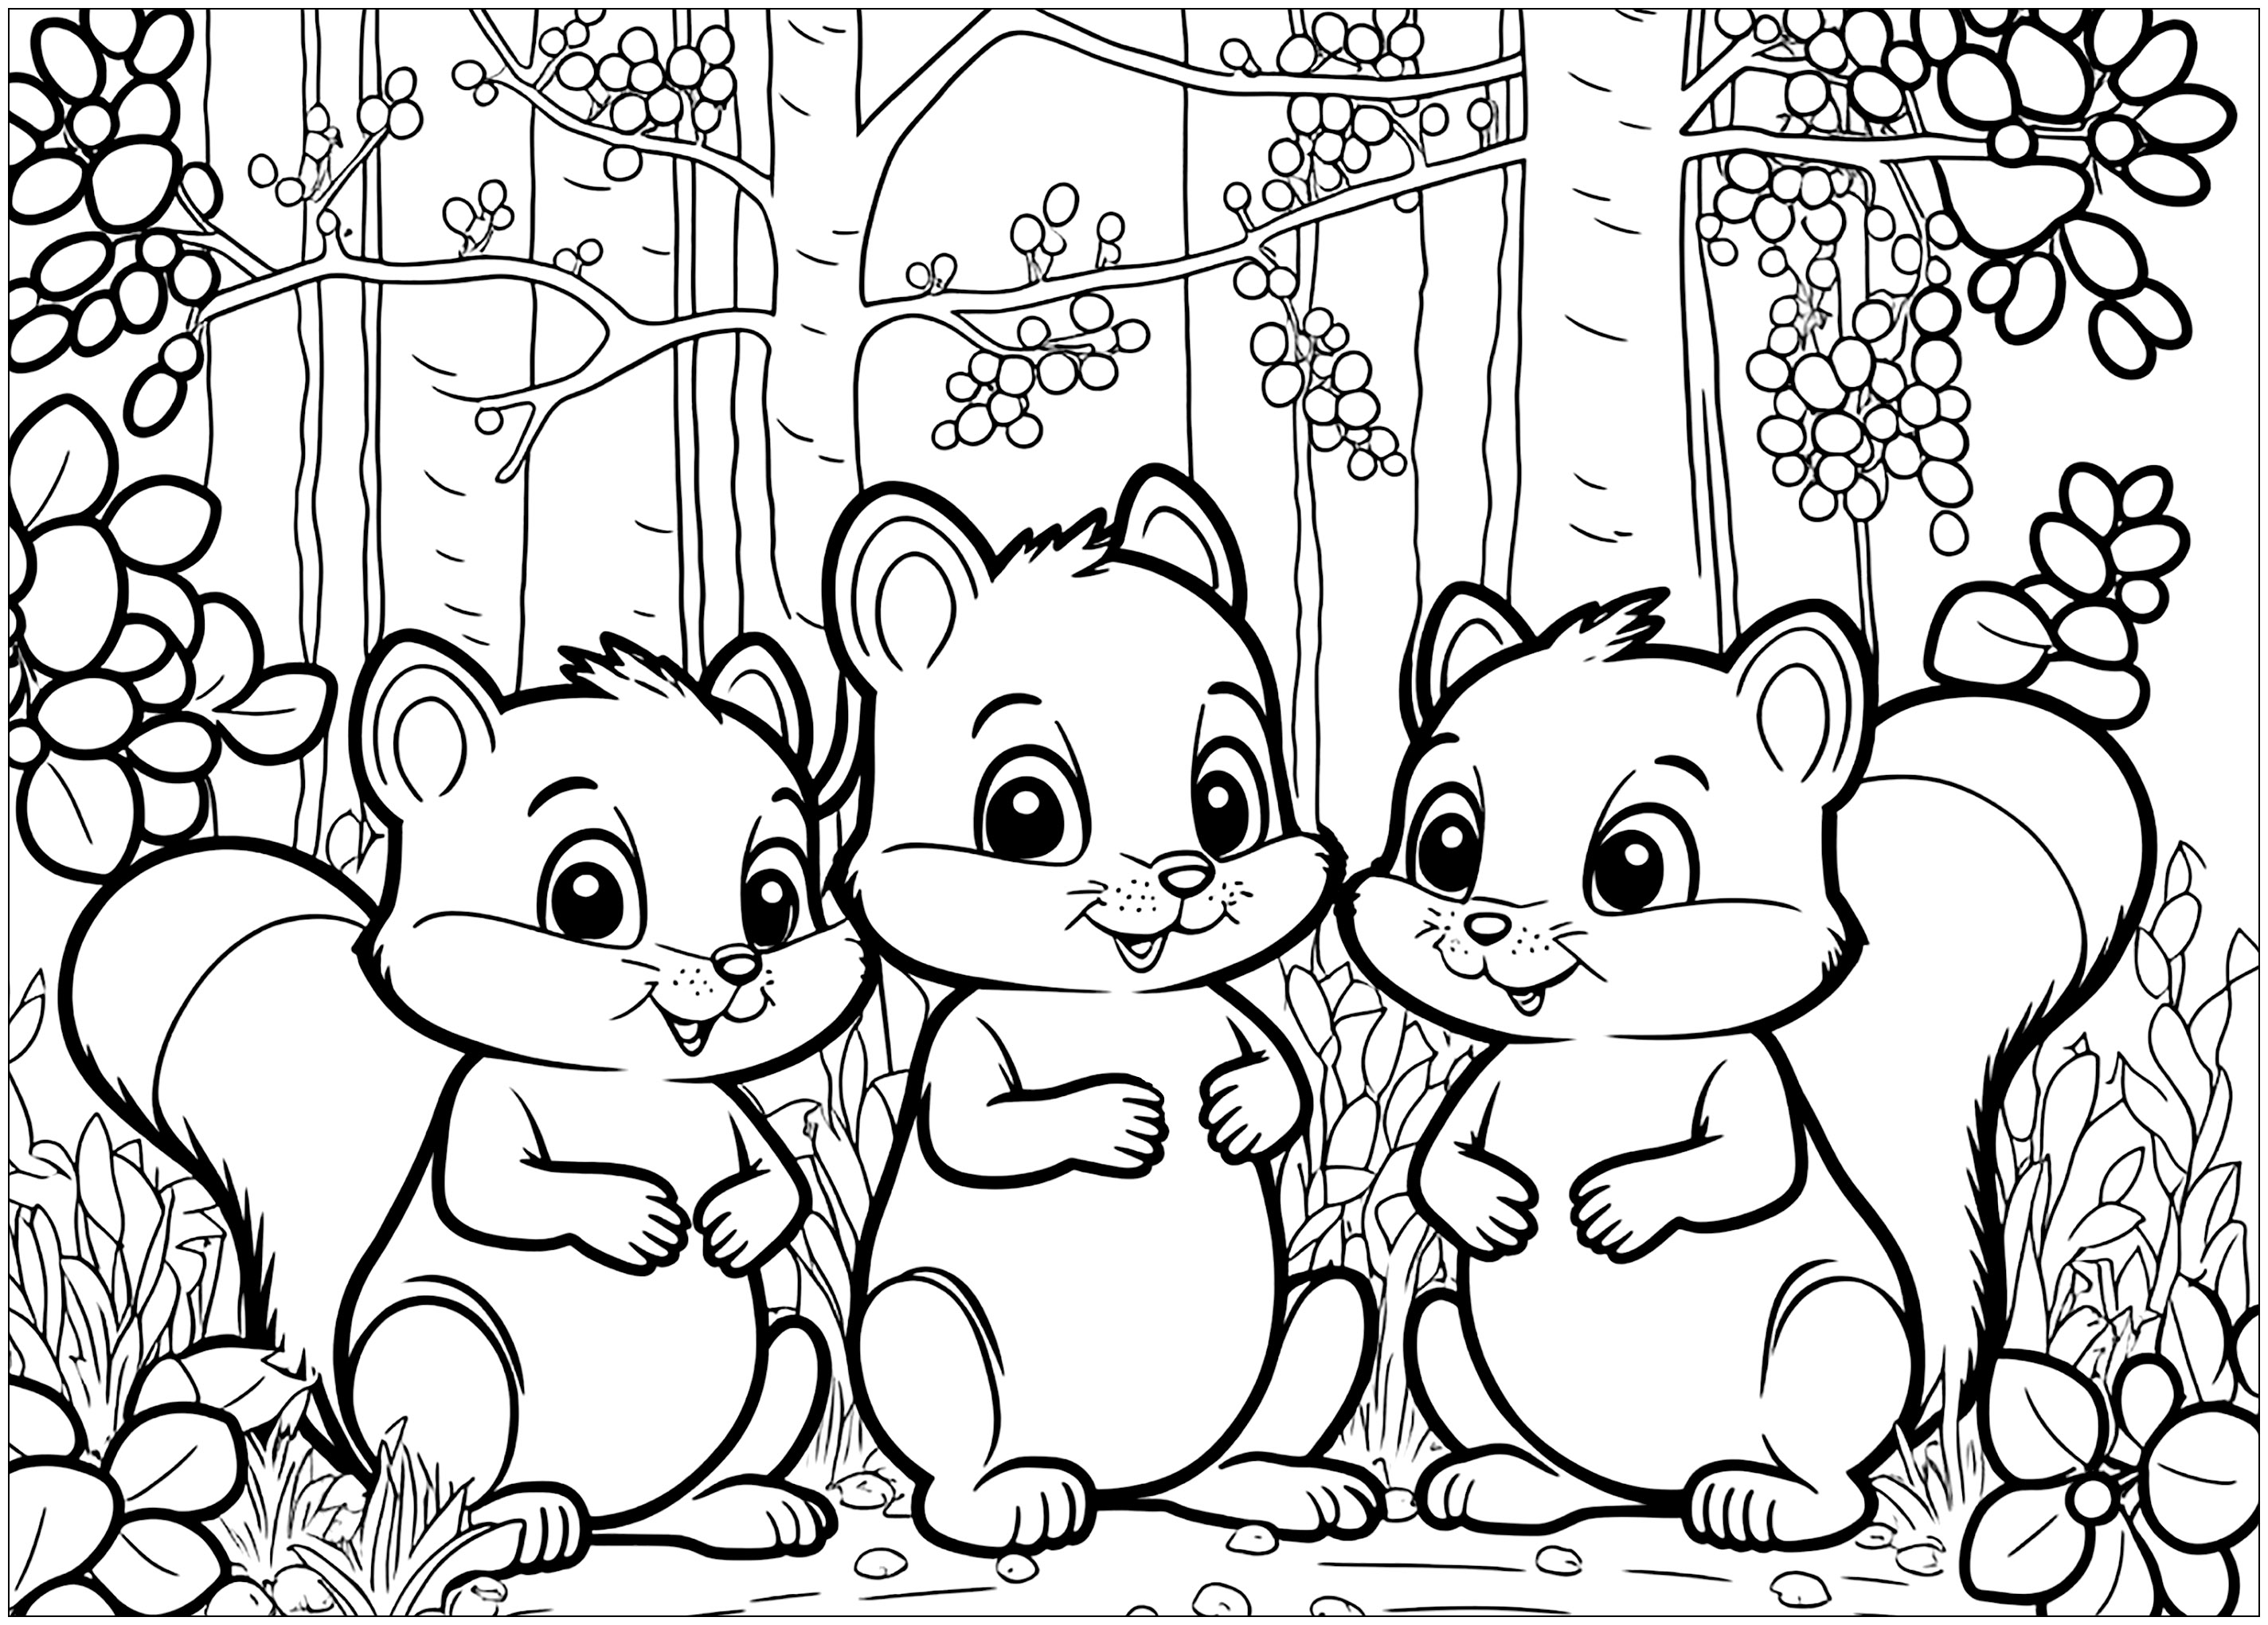 Three cute little squirrels in the forest